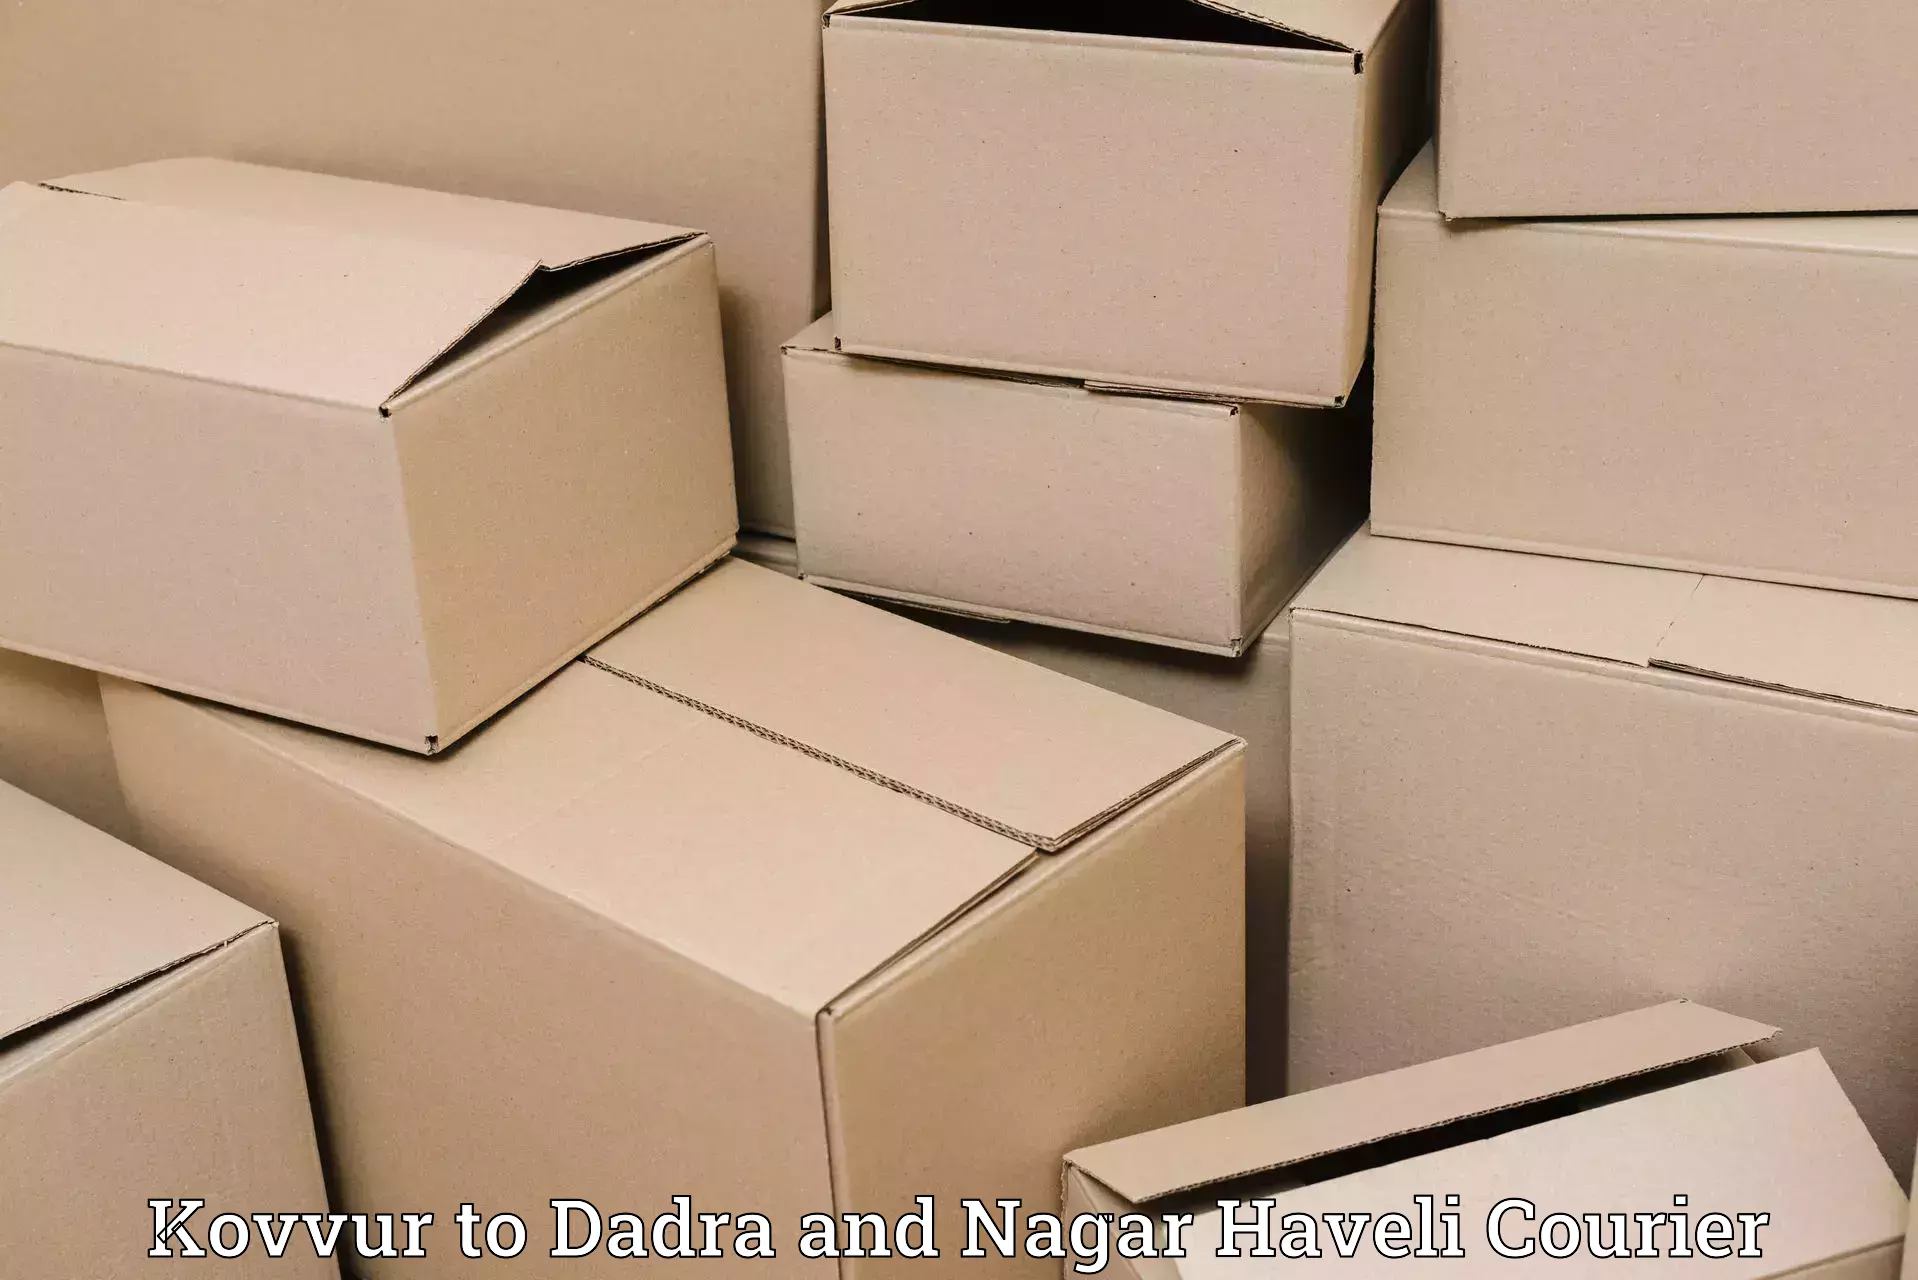 Courier services Kovvur to Dadra and Nagar Haveli